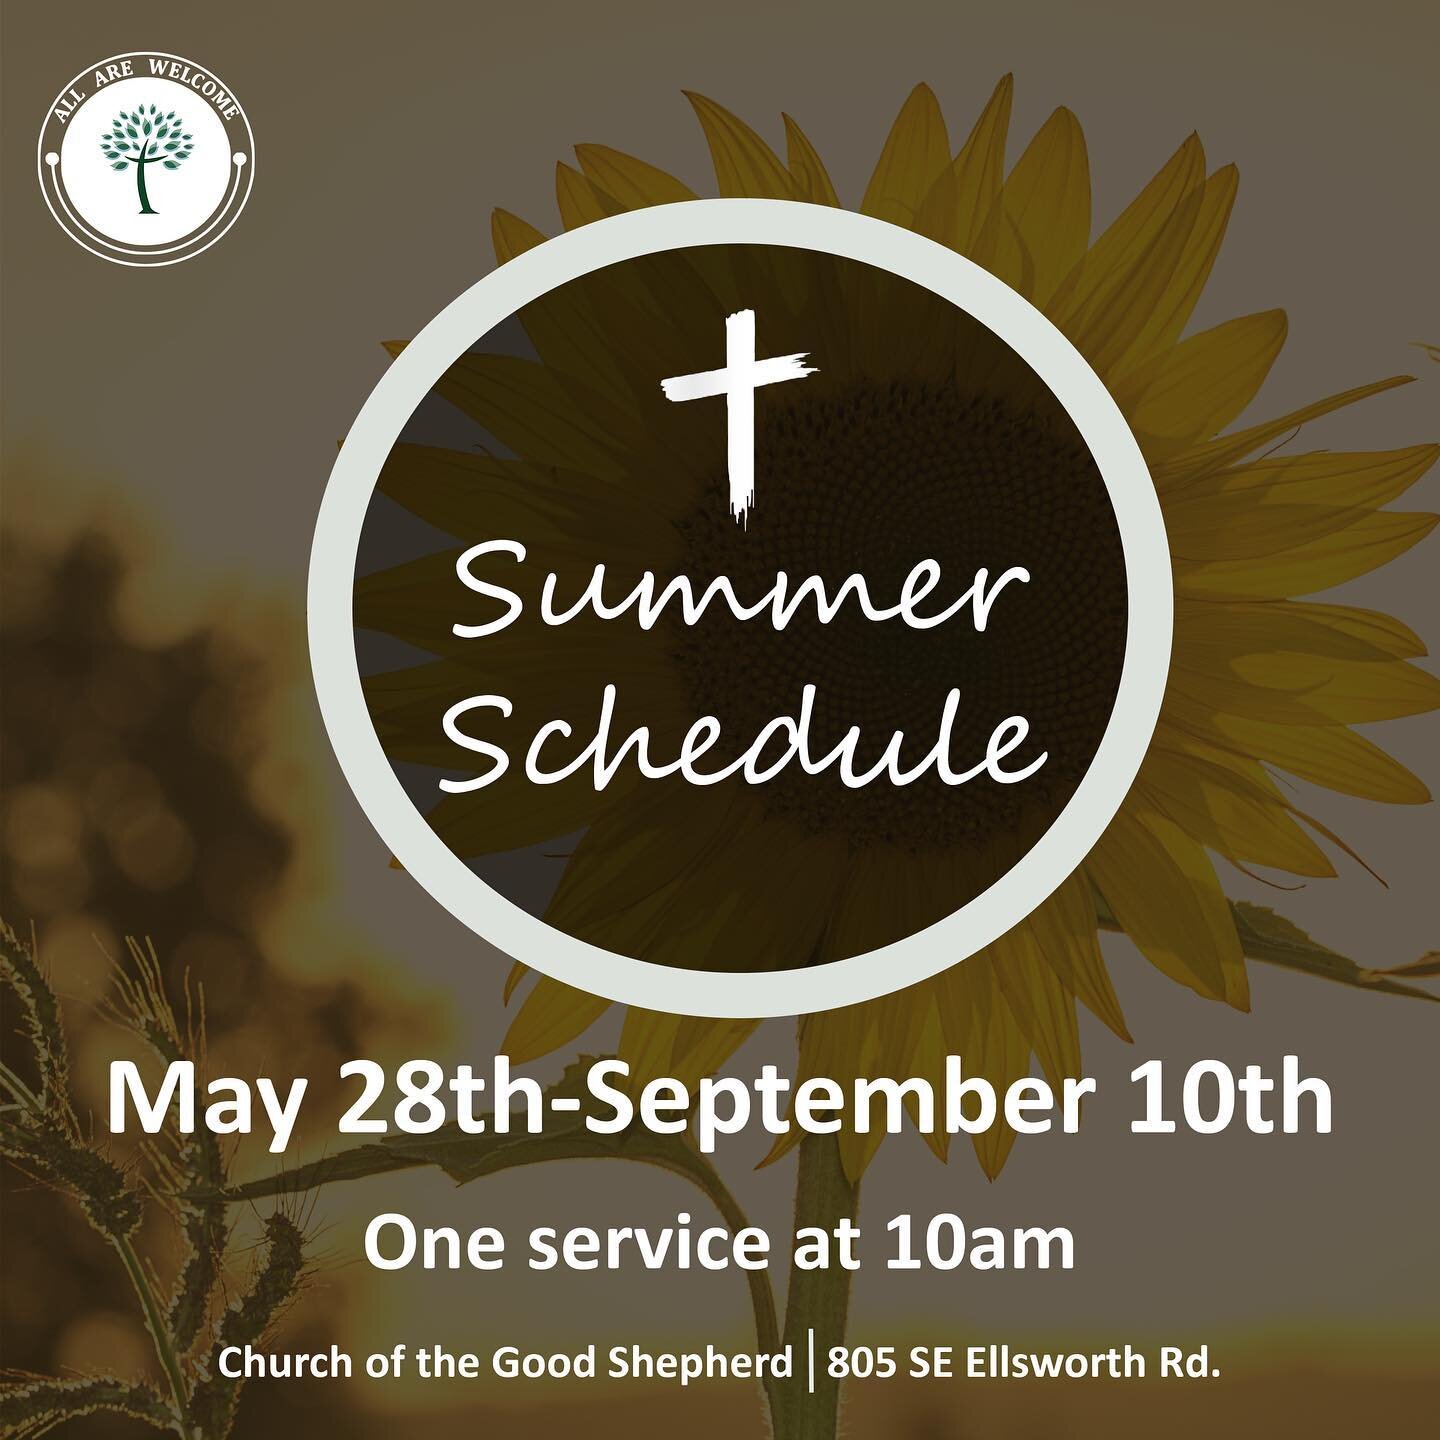 Starting on May 28th until September 10th we will move to our summer schedule with one service only at 10am! Join us in-person or online all summer, whichever works best for you! 

*Church of the Good Shepherd will not tolerate any disrespectful, dis